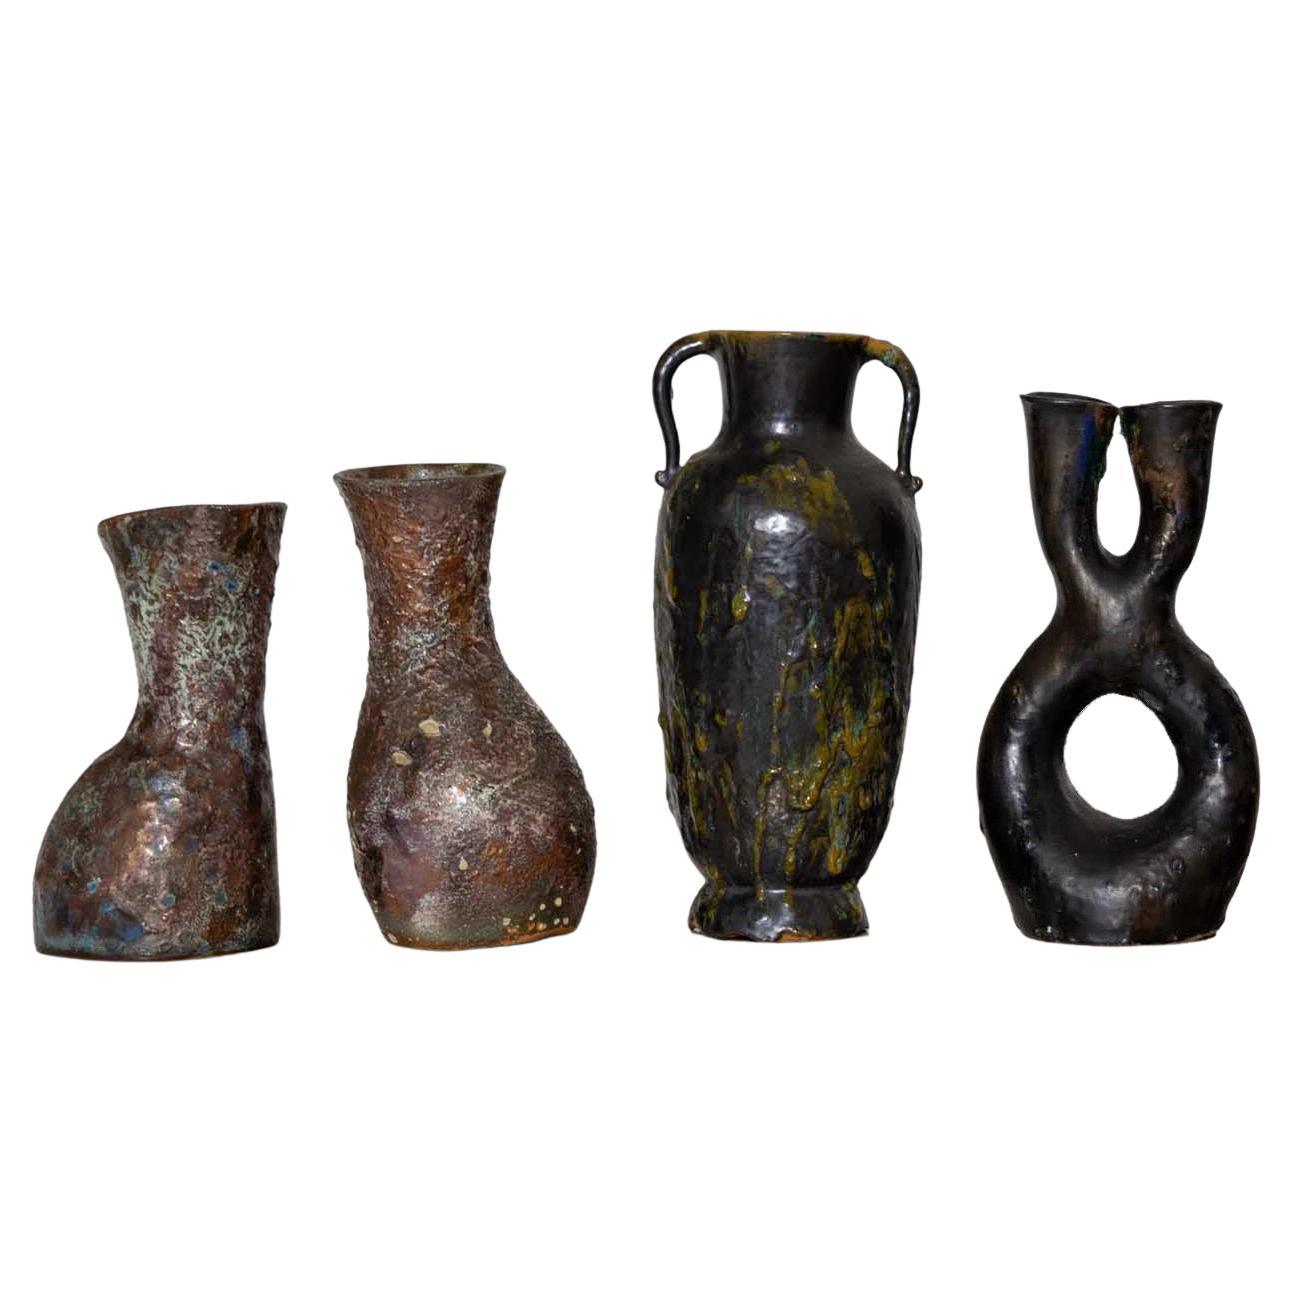 Four Brutalist Ceramic Vases by Nereo Boaretto, Italy 1950s For Sale